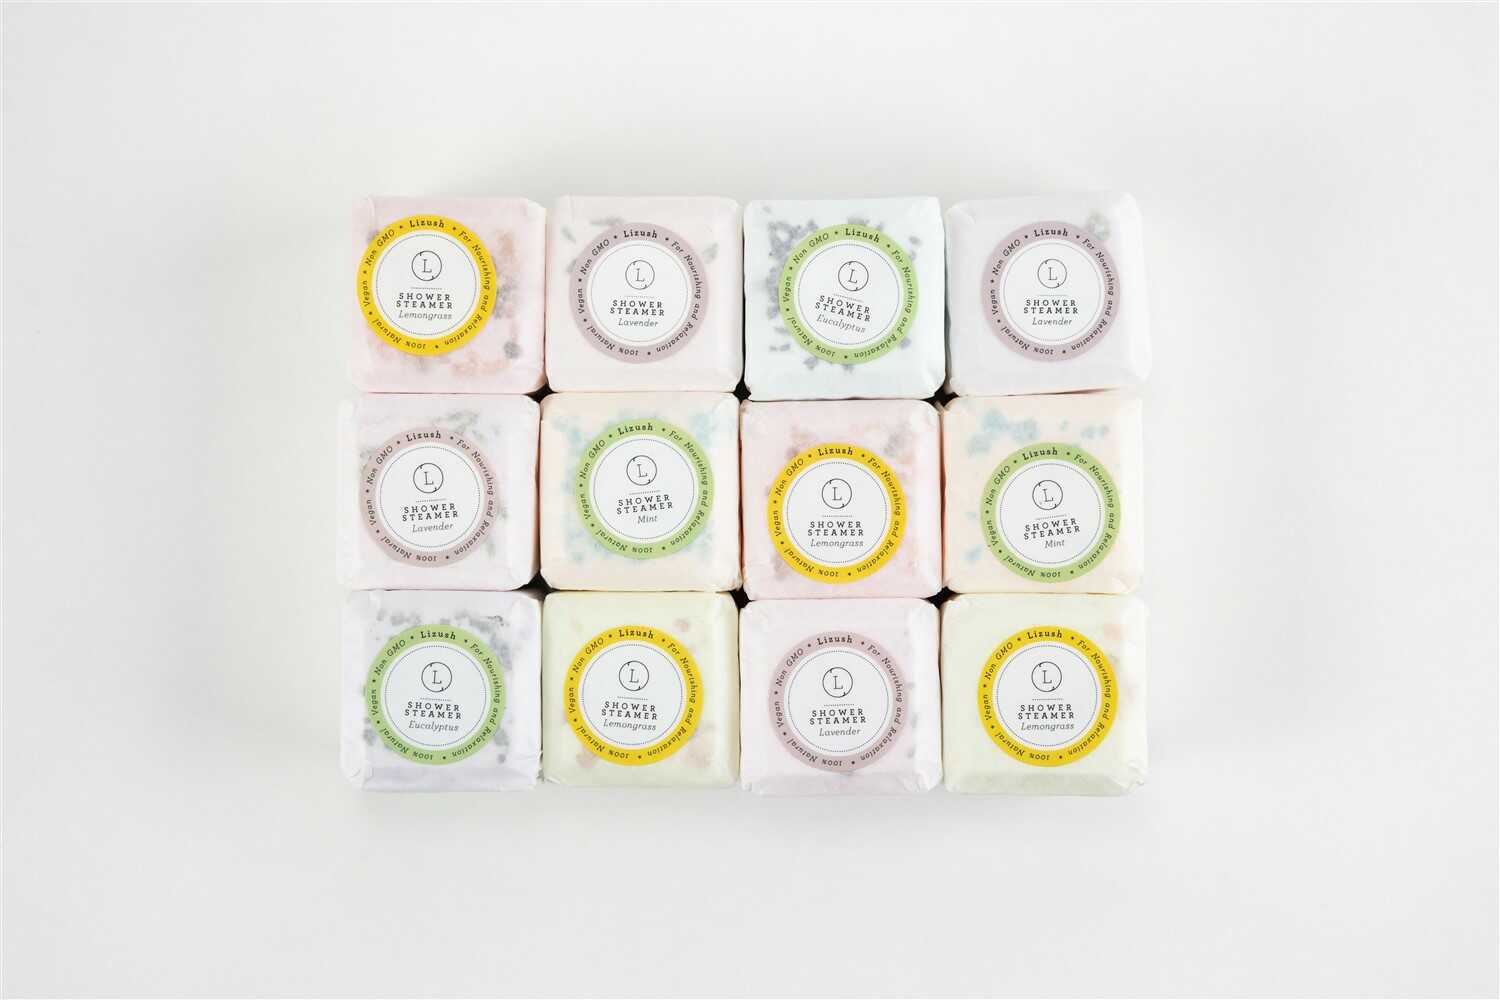 Shower Steamers, Set of 12 big fizzies, Cheer up Gift Set, Relaxing Gift Box